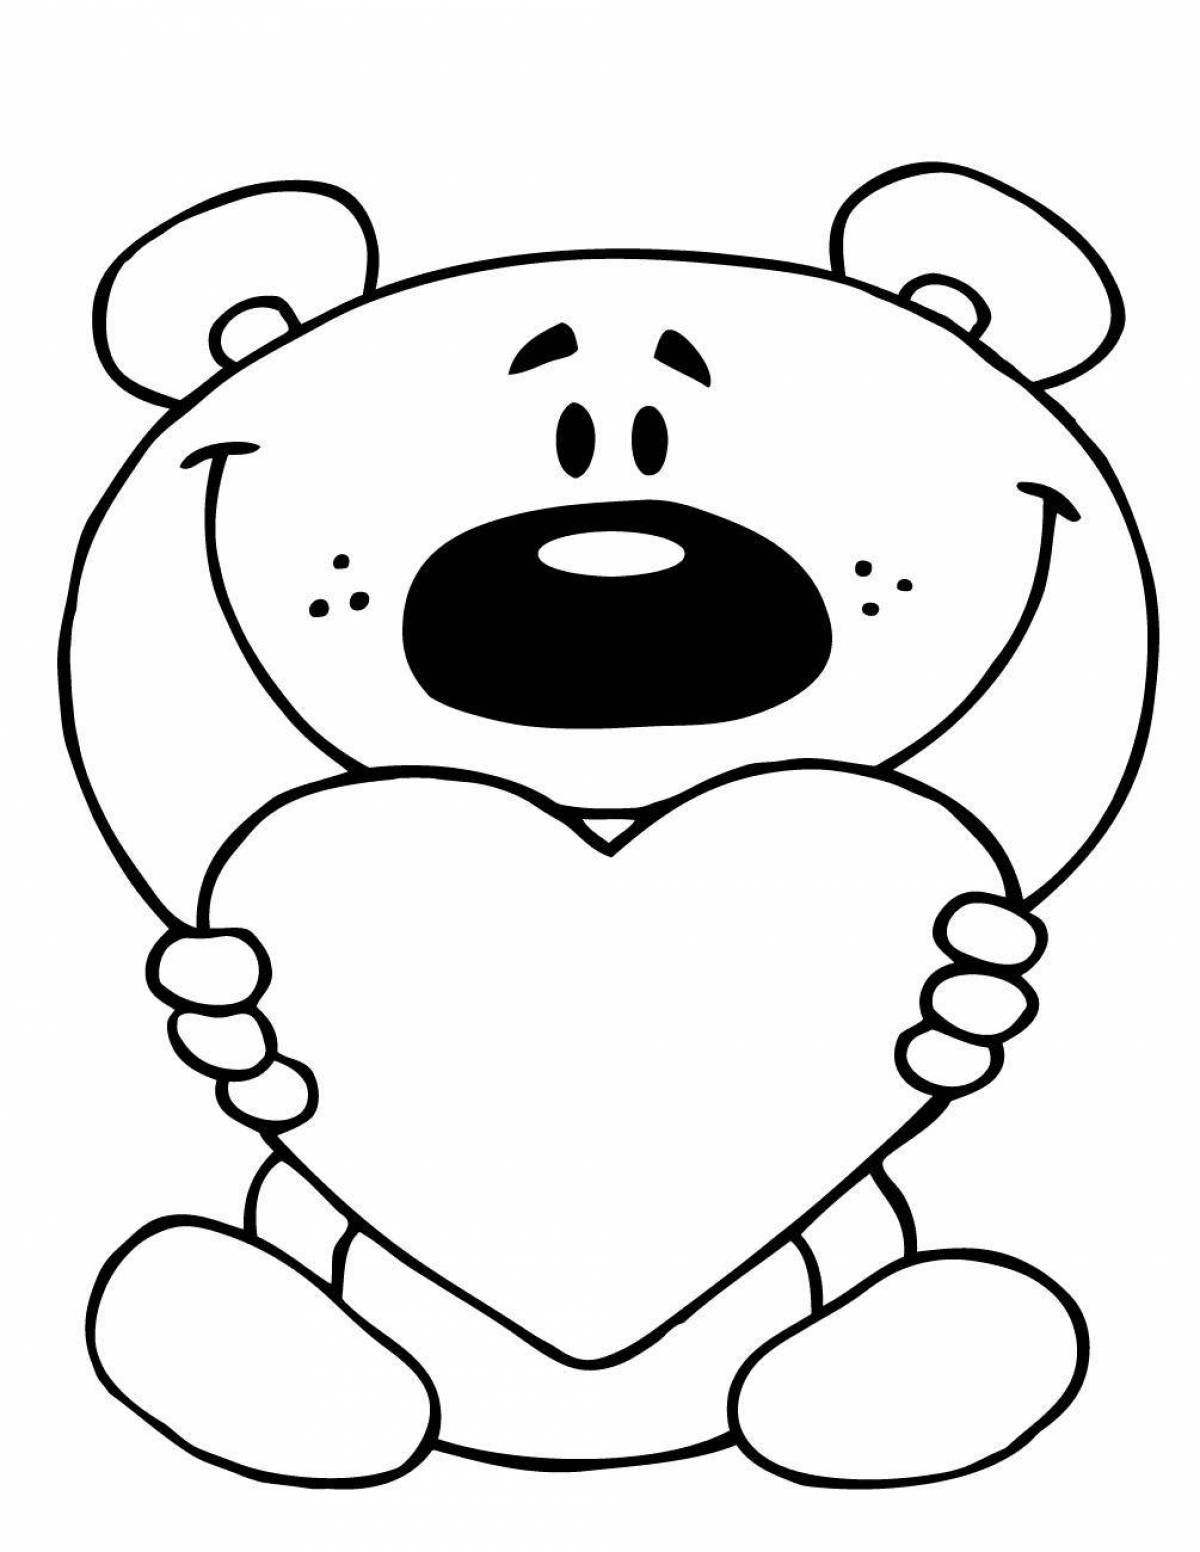 Coloring book cute bear with a bow